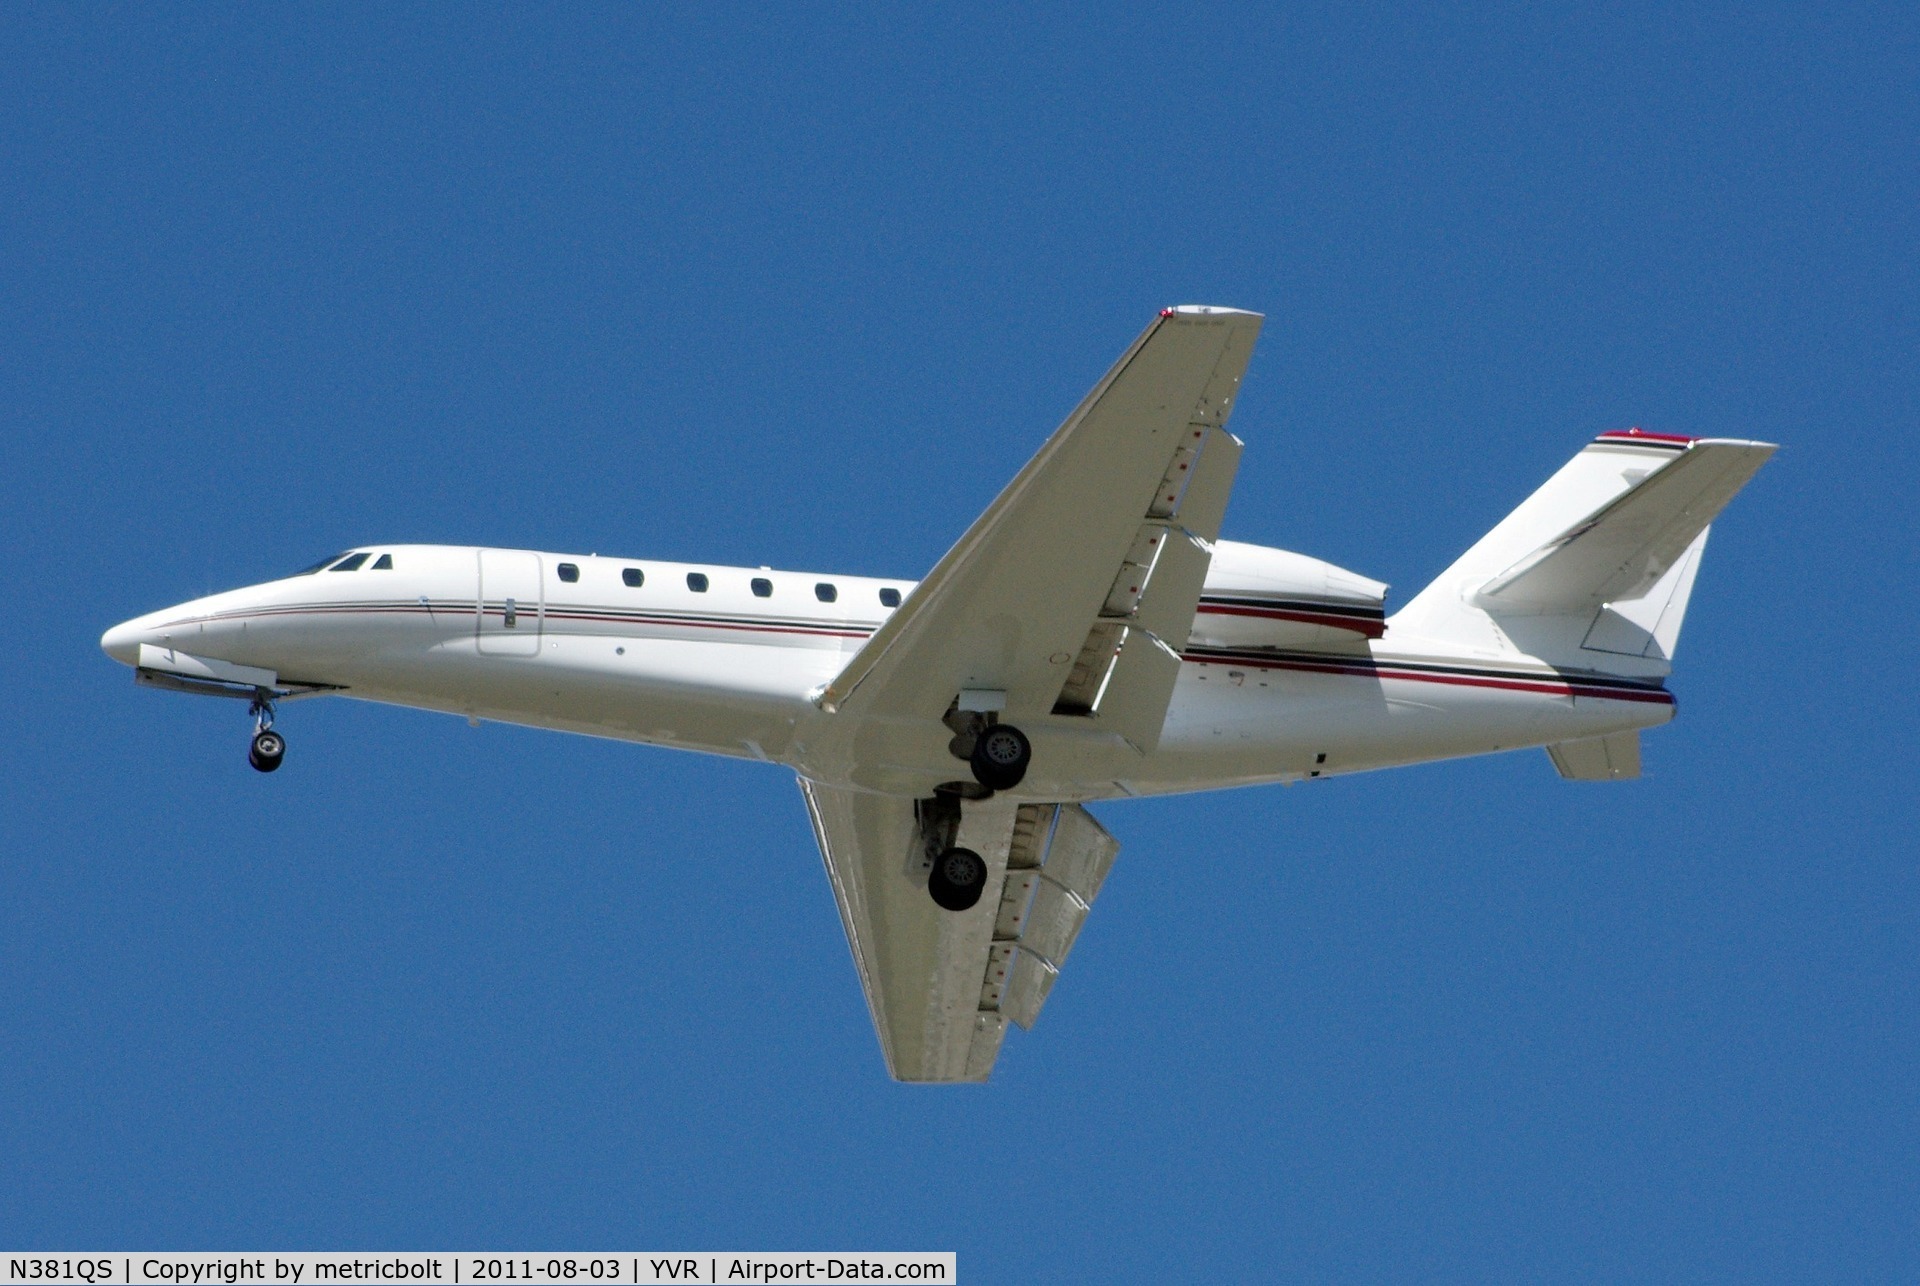 N381QS, 2006 Cessna 680 Citation Sovereign C/N 680-0097, Landing on a bright, sunny day .